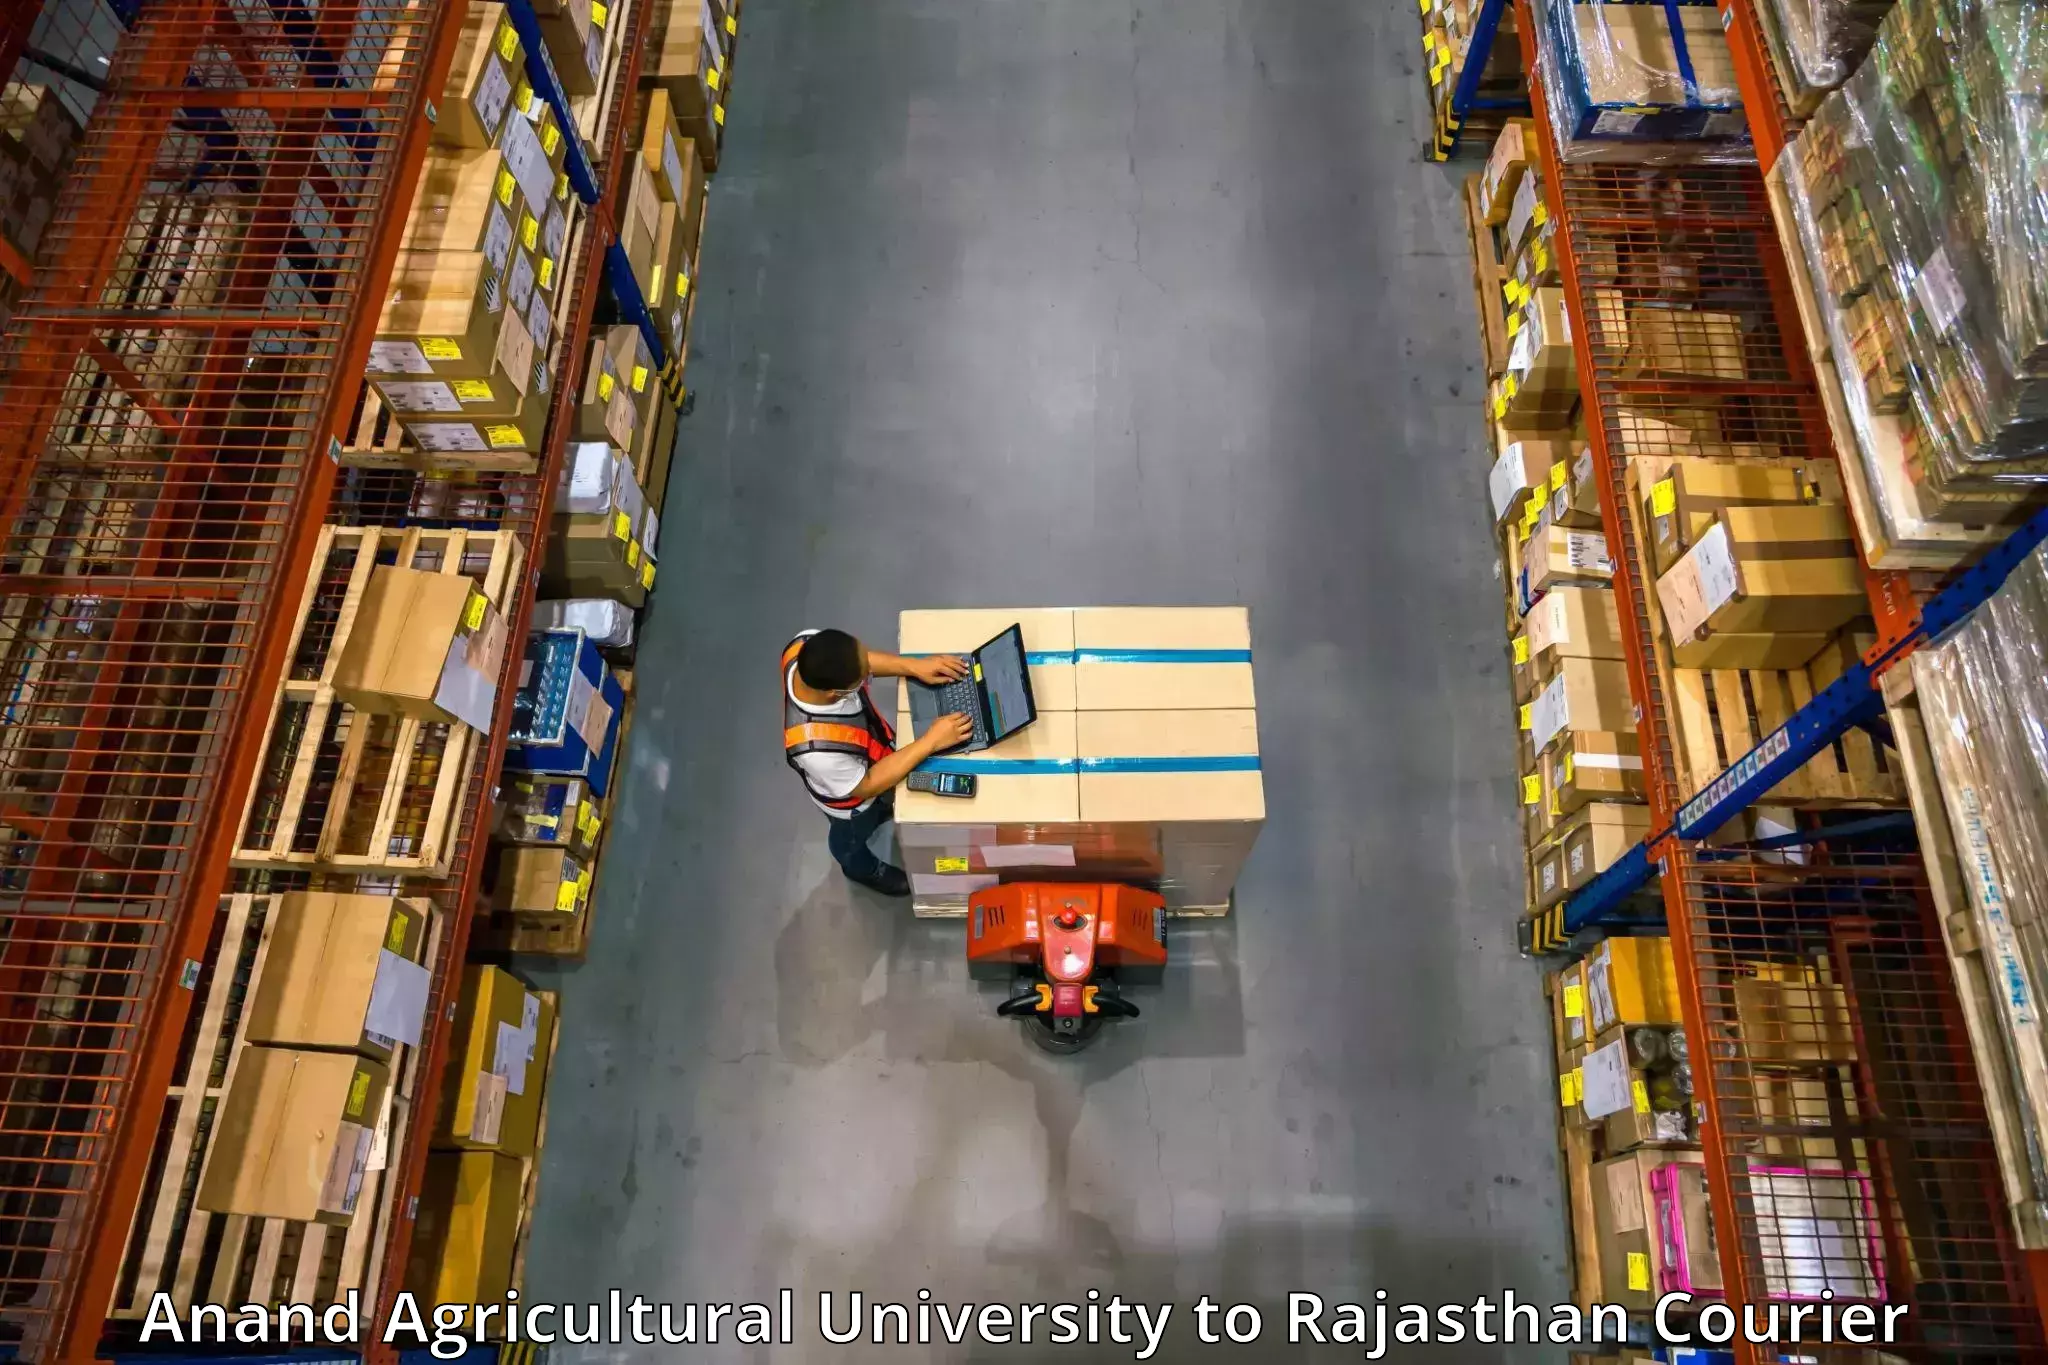 Skilled furniture transporters Anand Agricultural University to Jaipur